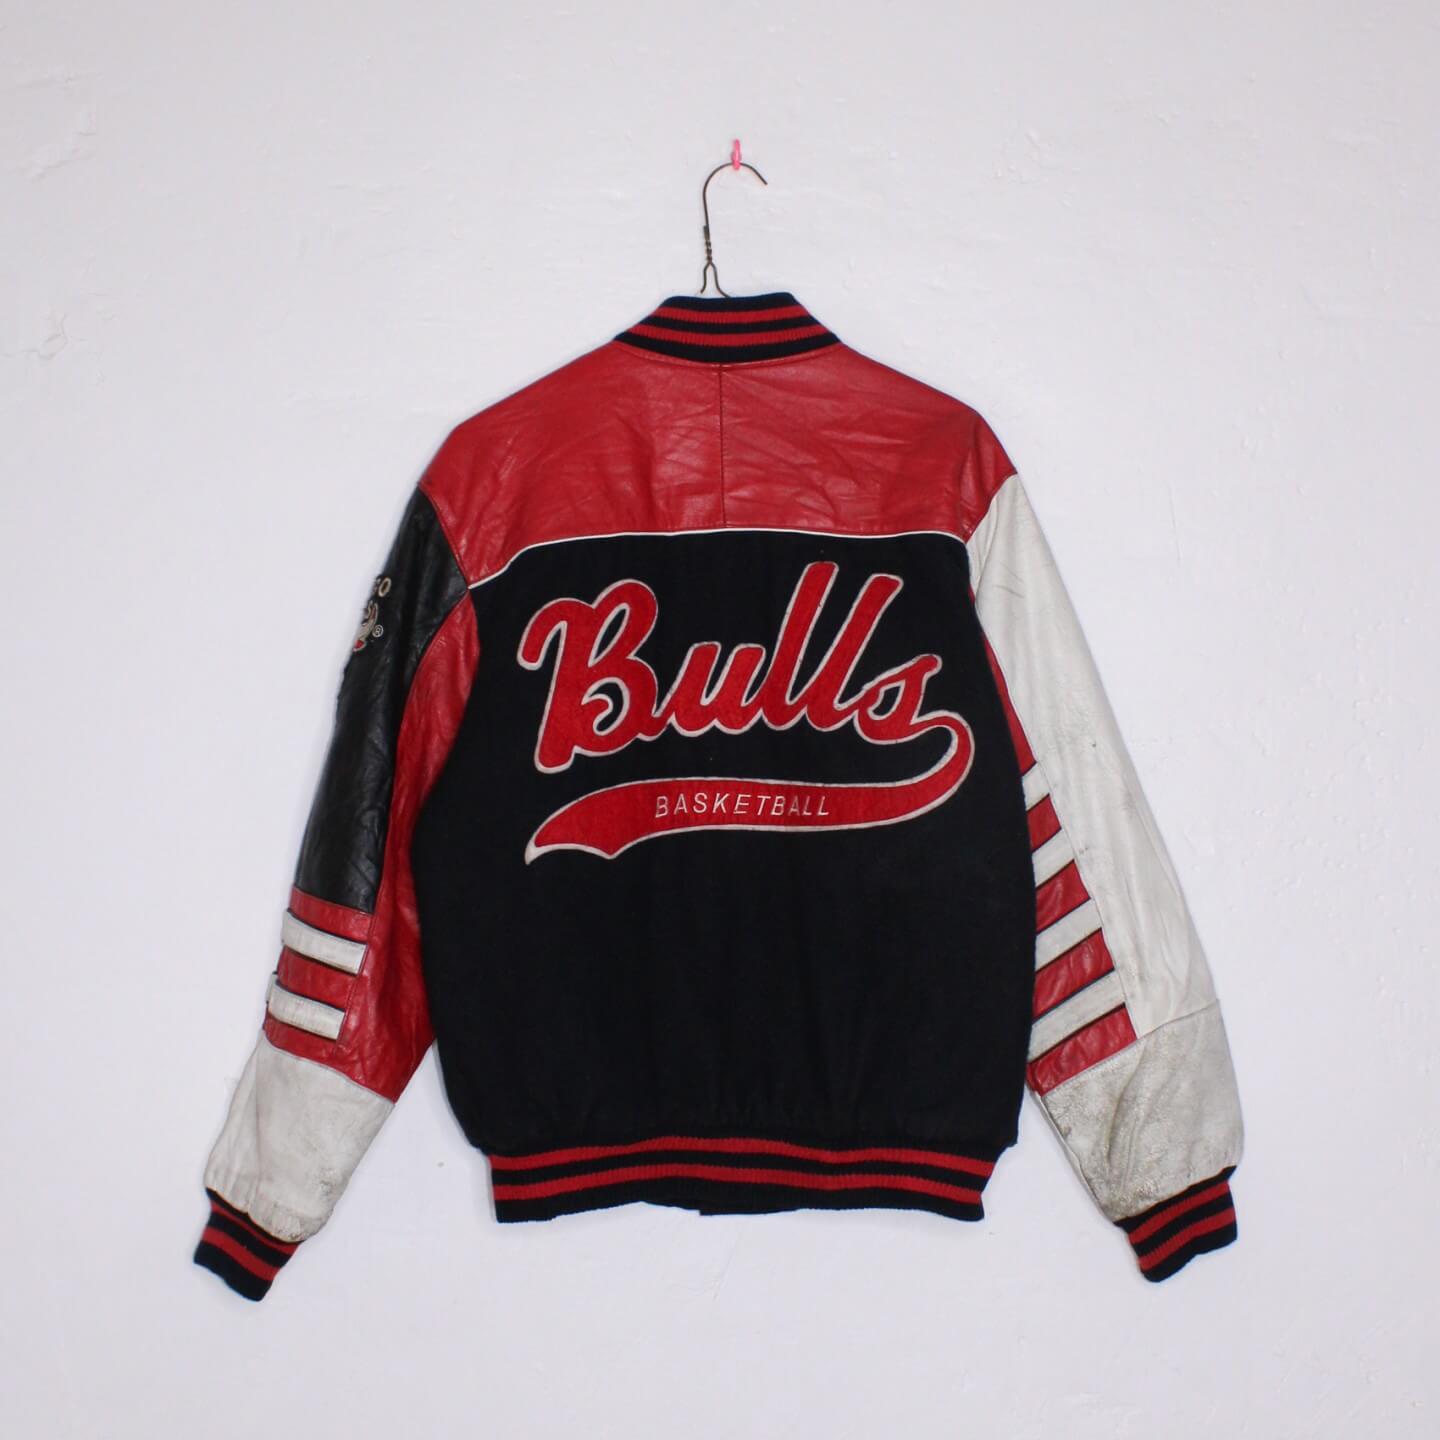 Vintage NBA Chicago Bulls Black, White and Red Jacket Size Small